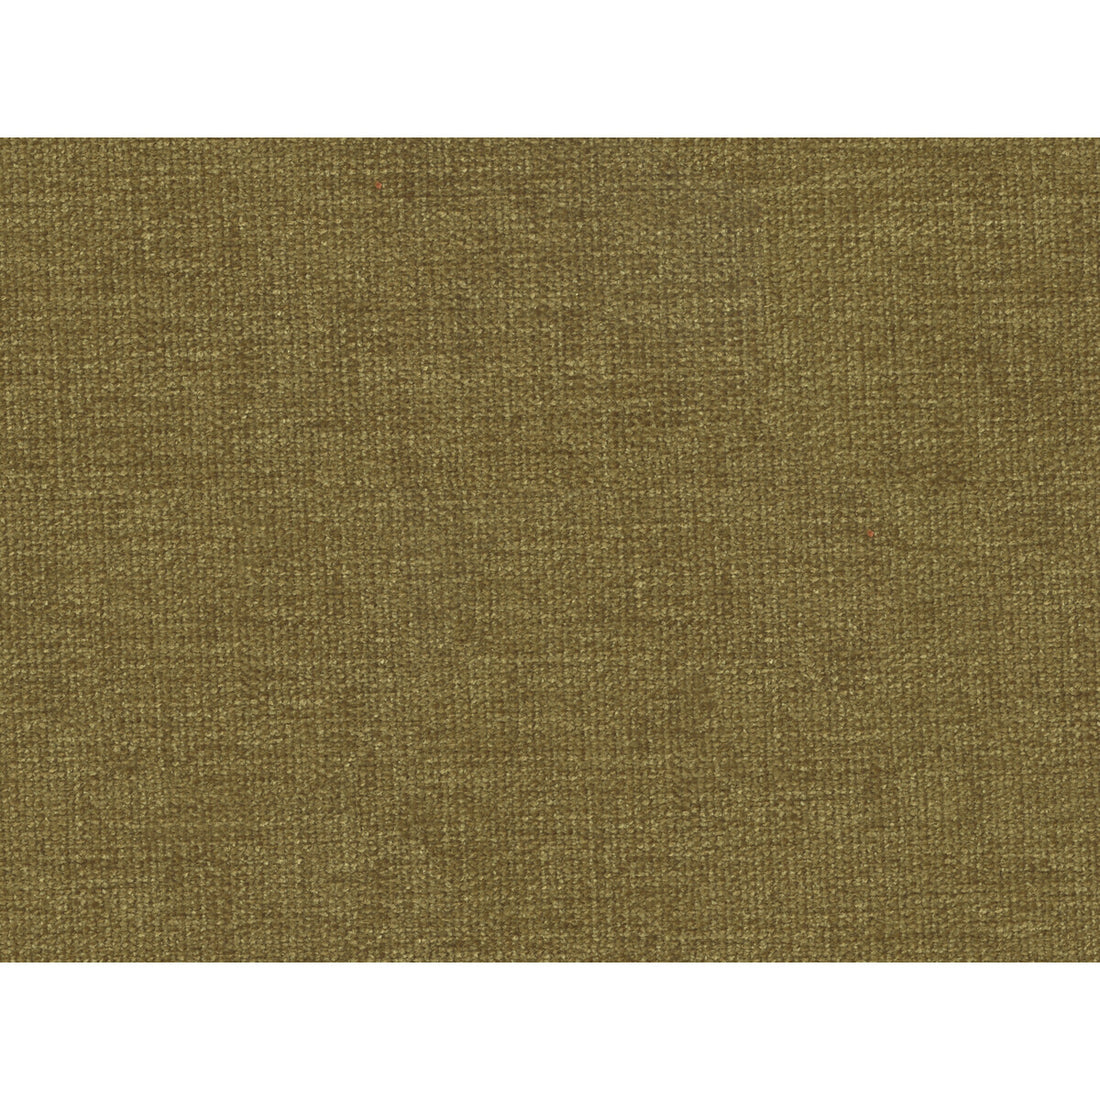 Kravet Contract fabric in 34961-33 color - pattern 34961.33.0 - by Kravet Contract in the Performance Kravetarmor collection